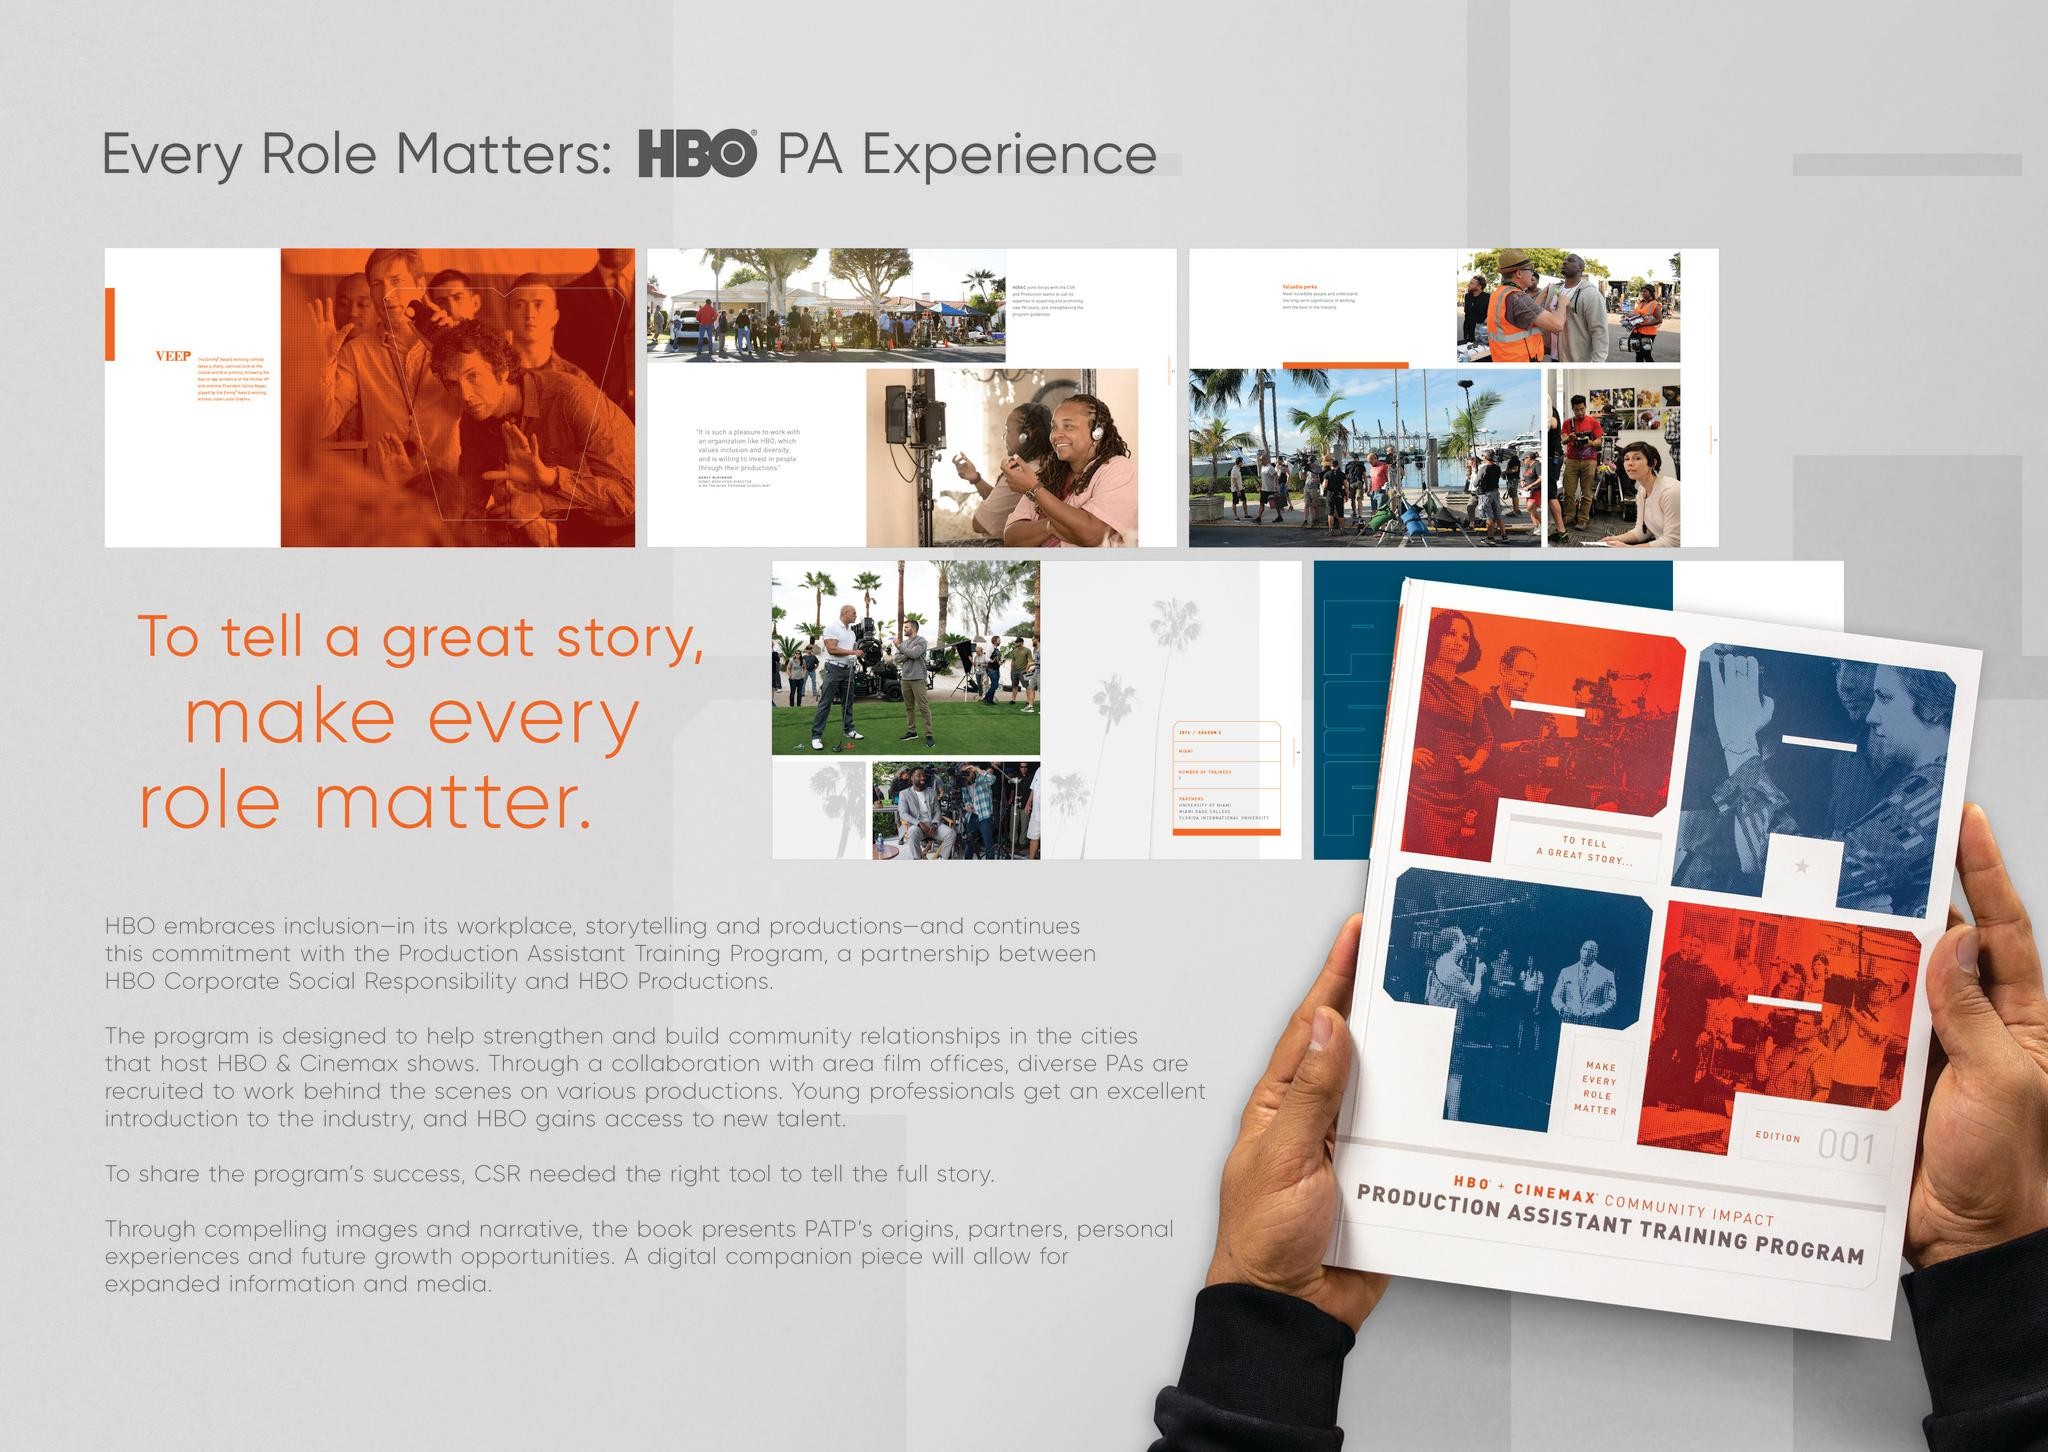 Every Role Matters: HBO PA Experience